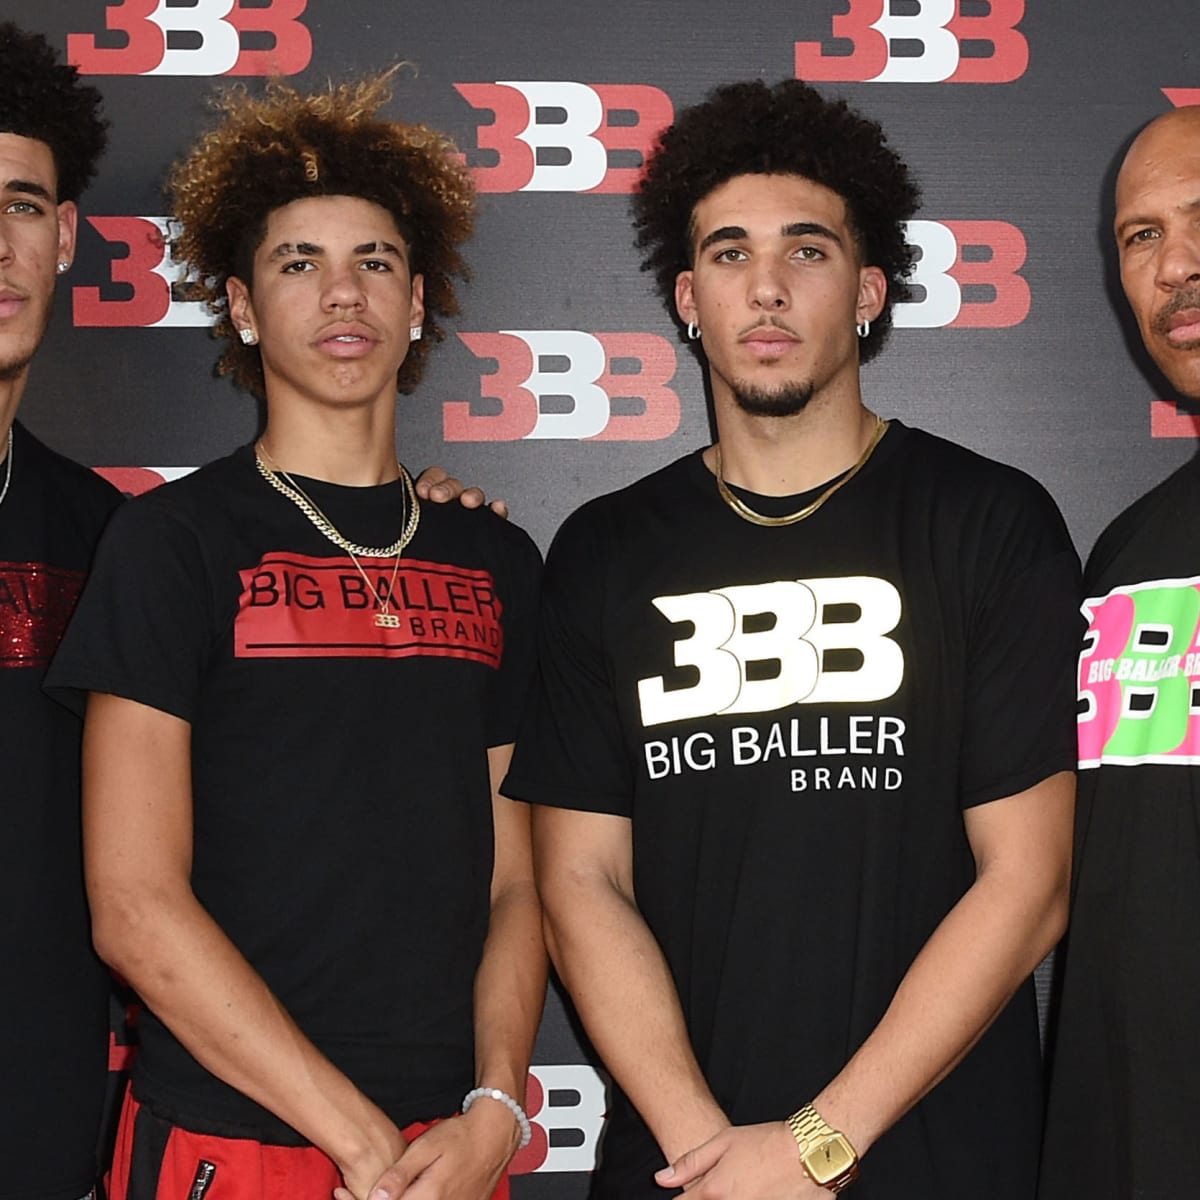 Big Baller Brand on X: You all knew it was just a matter of time